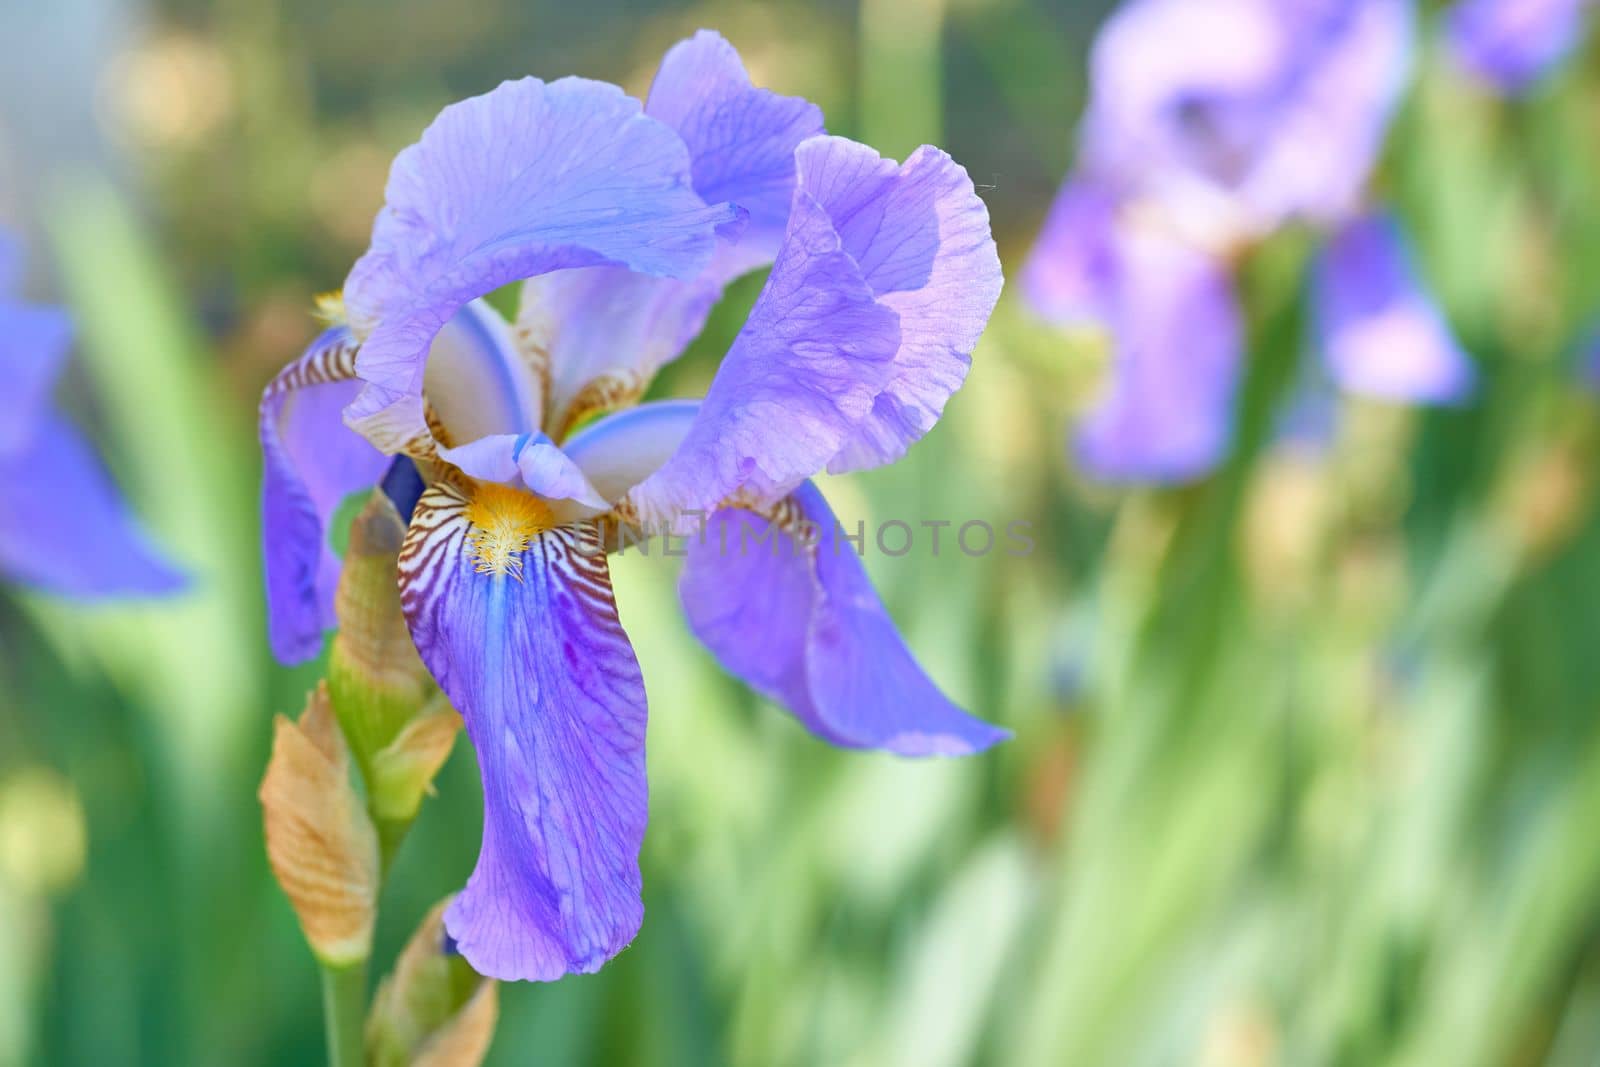 an Old World plant of the iris family, with sword shaped leaves and spikes of brightly colored flowers, popular in gardens as a cut flower